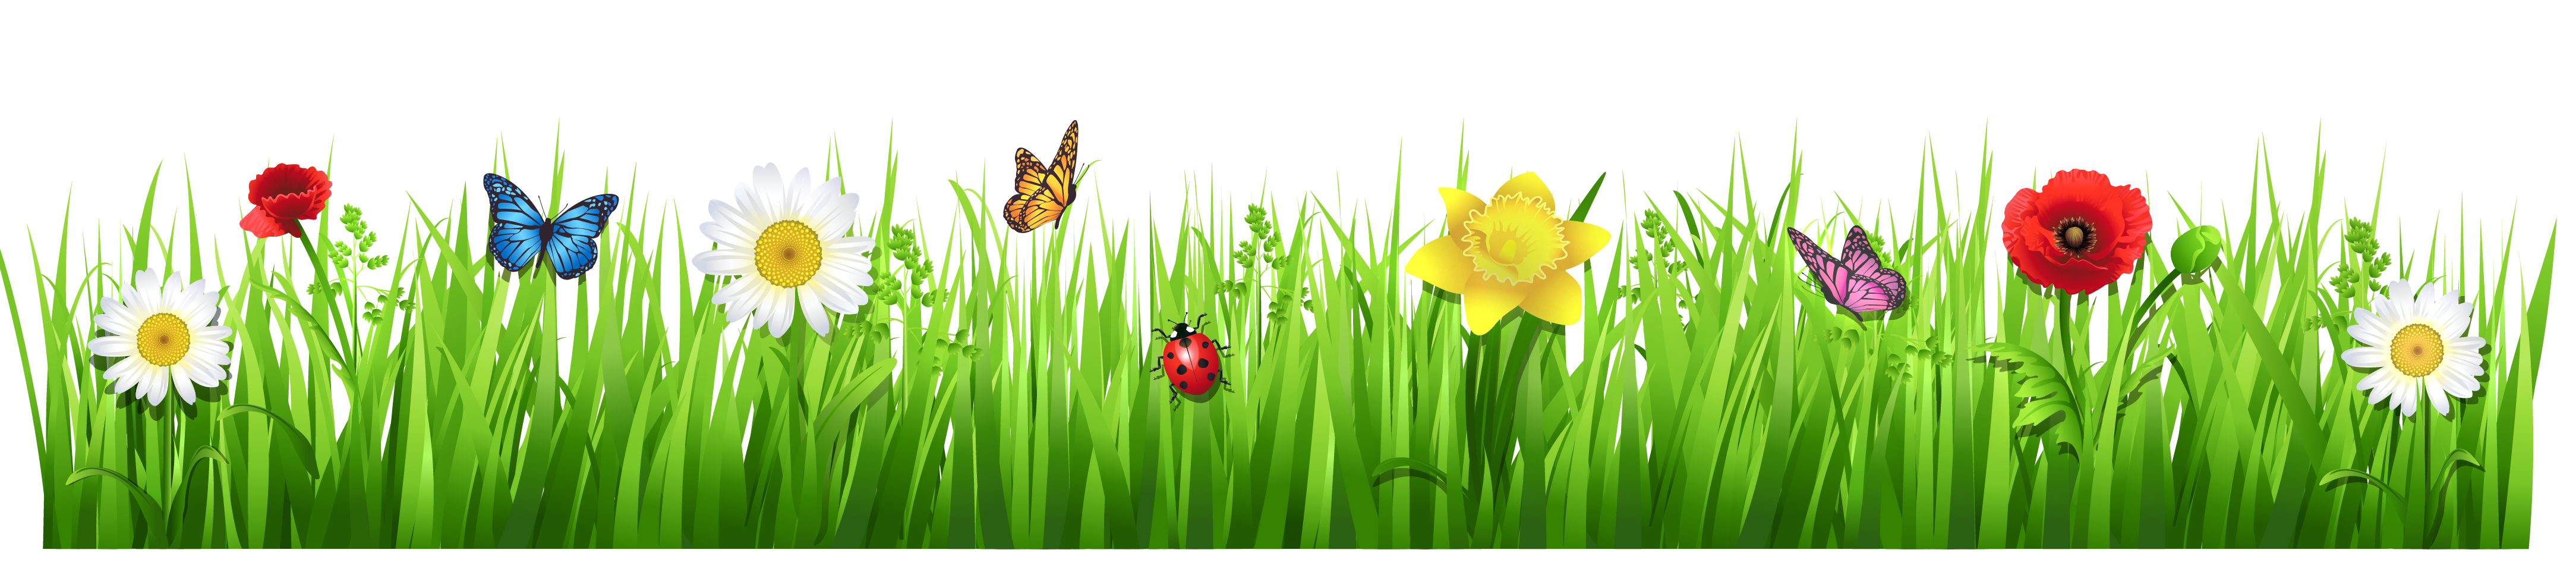 Spring grass with flowers clipart picture 0 image #10966